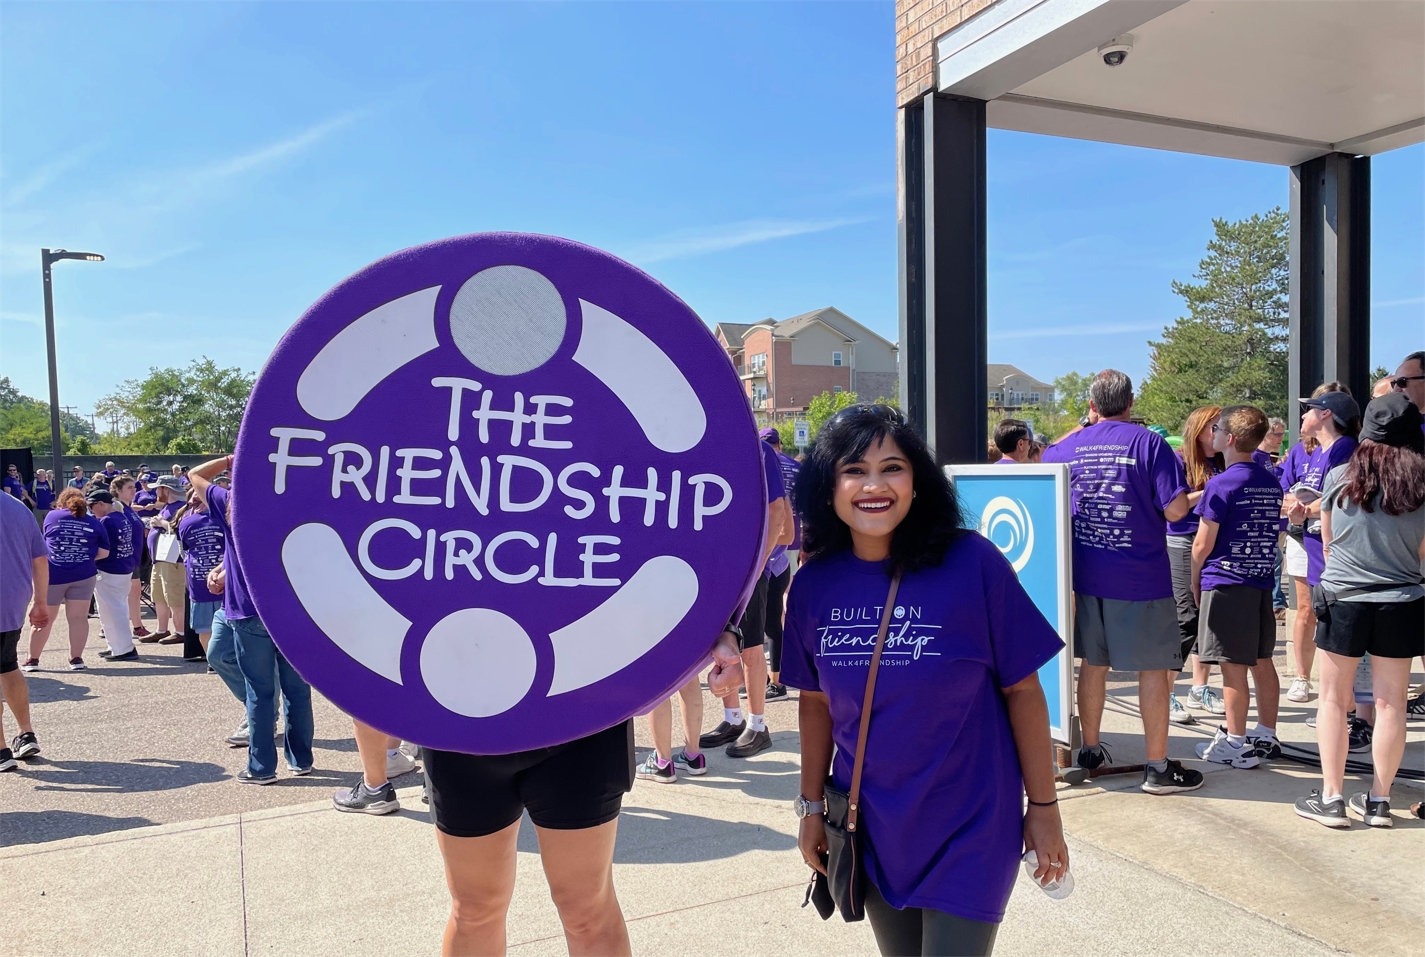 RPT is proud to be part of the Friendship Circle family and a partner in support of this most important cause. Our team was thrilled to participate in WALK4FRIENDSHIP, an annual walk that raises crucial funds and community awareness for Friendship Circle and individuals with special needs.